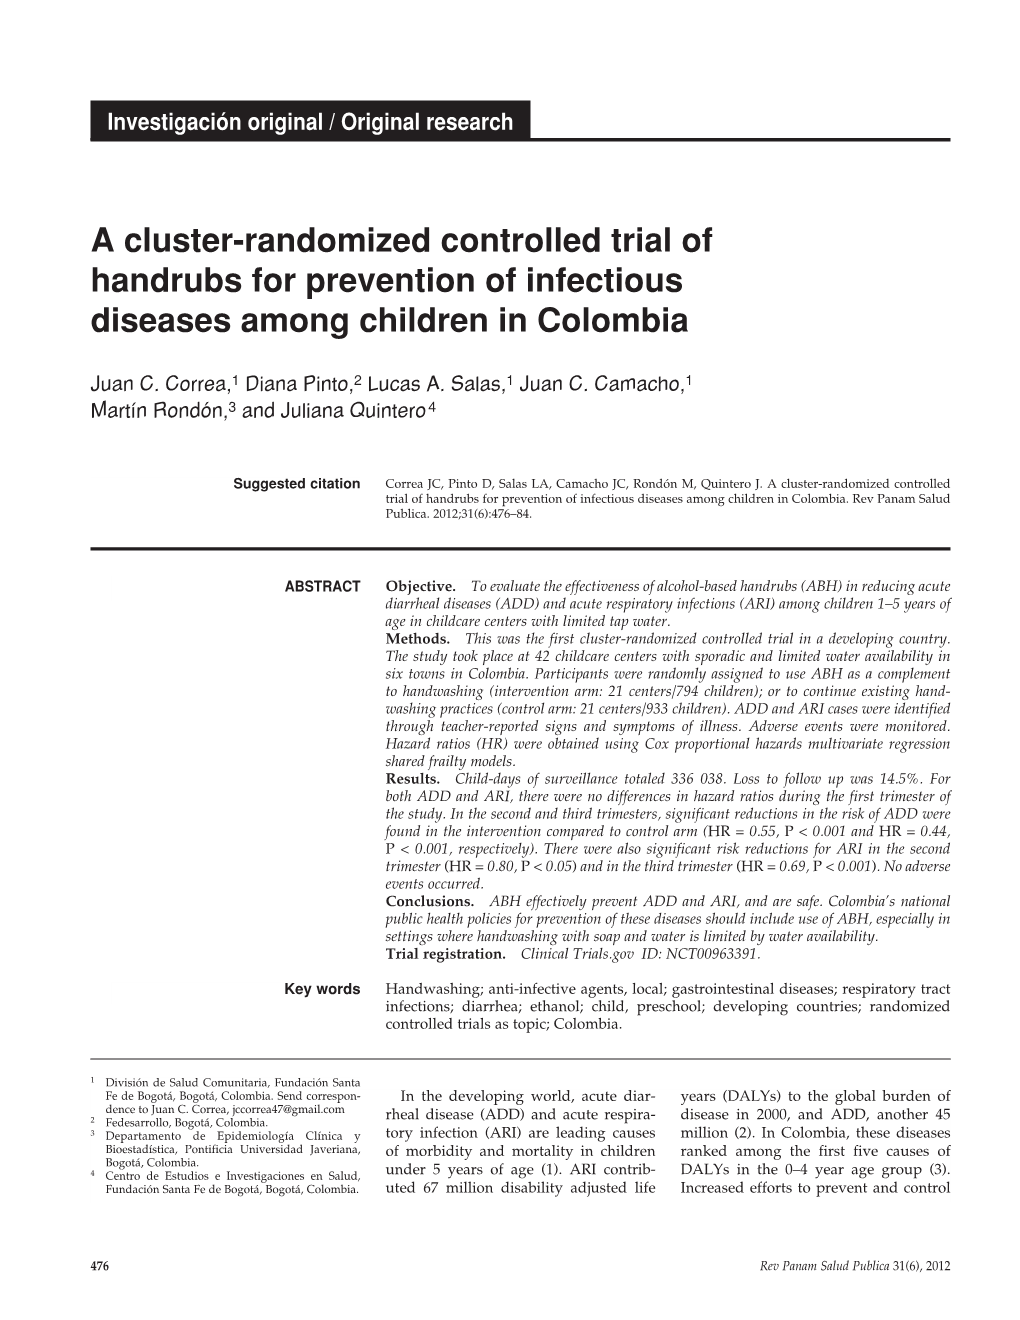 A Cluster-Randomized Controlled Trial of Handrubs for Prevention of Infectious Diseases Among Children in Colombia